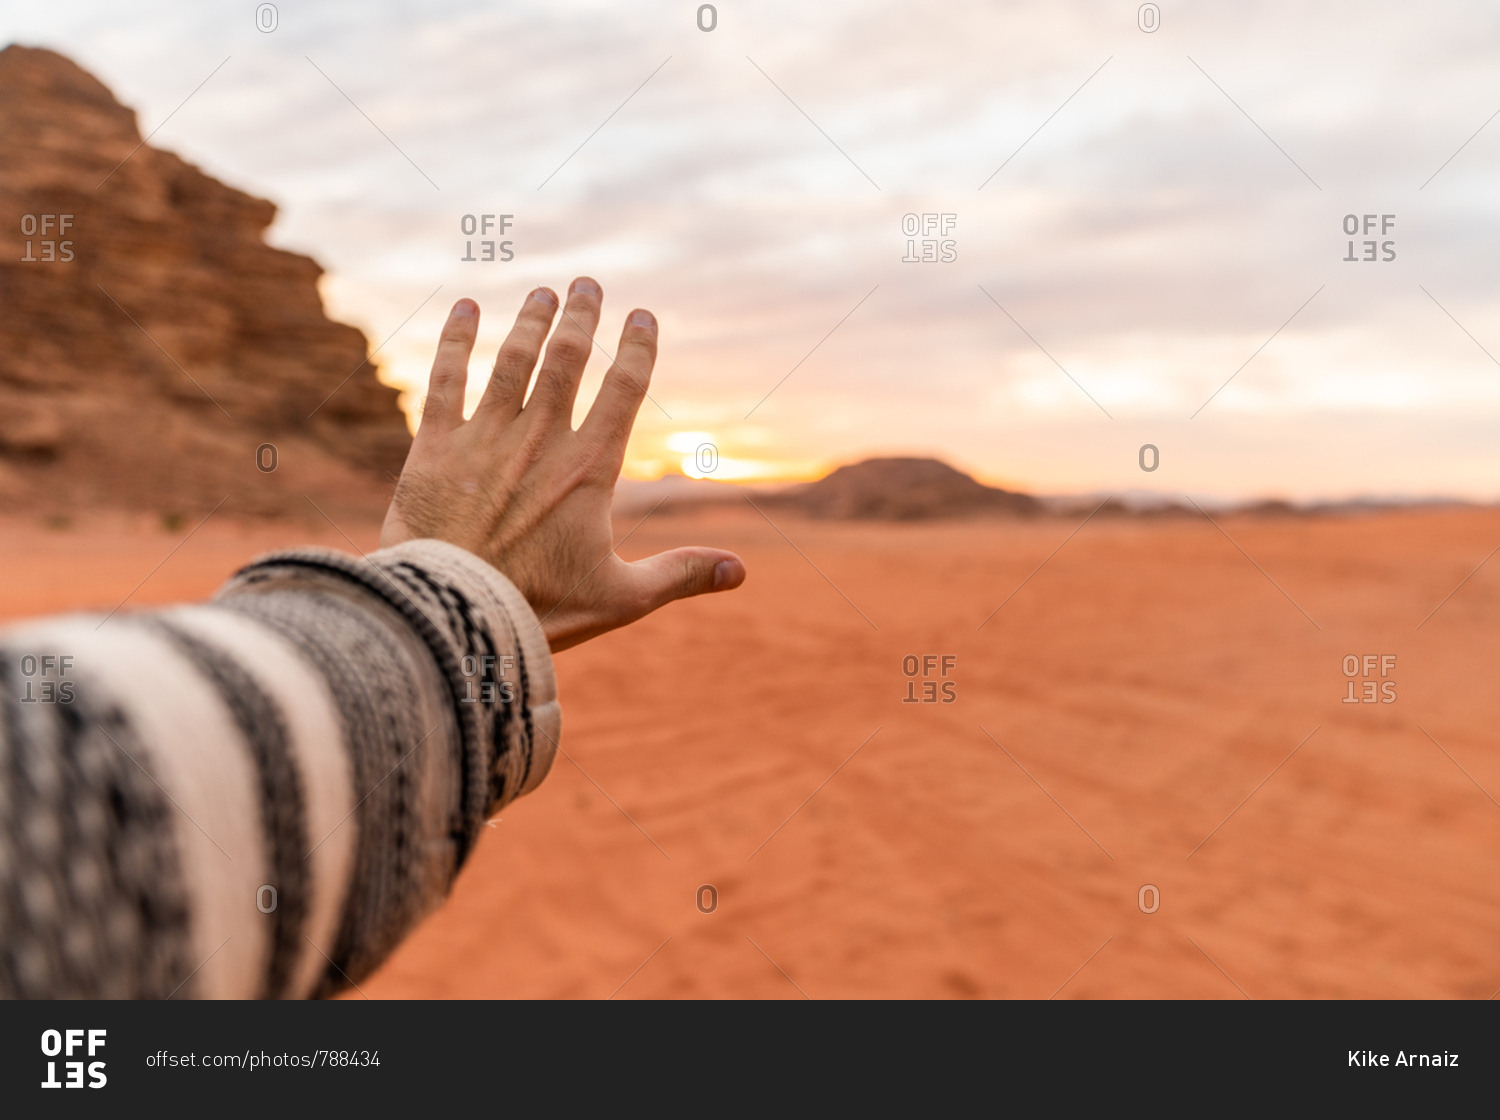 Crop male hand outstretched toward sunset sky in red desert valley of Wadi Rum, Jordan